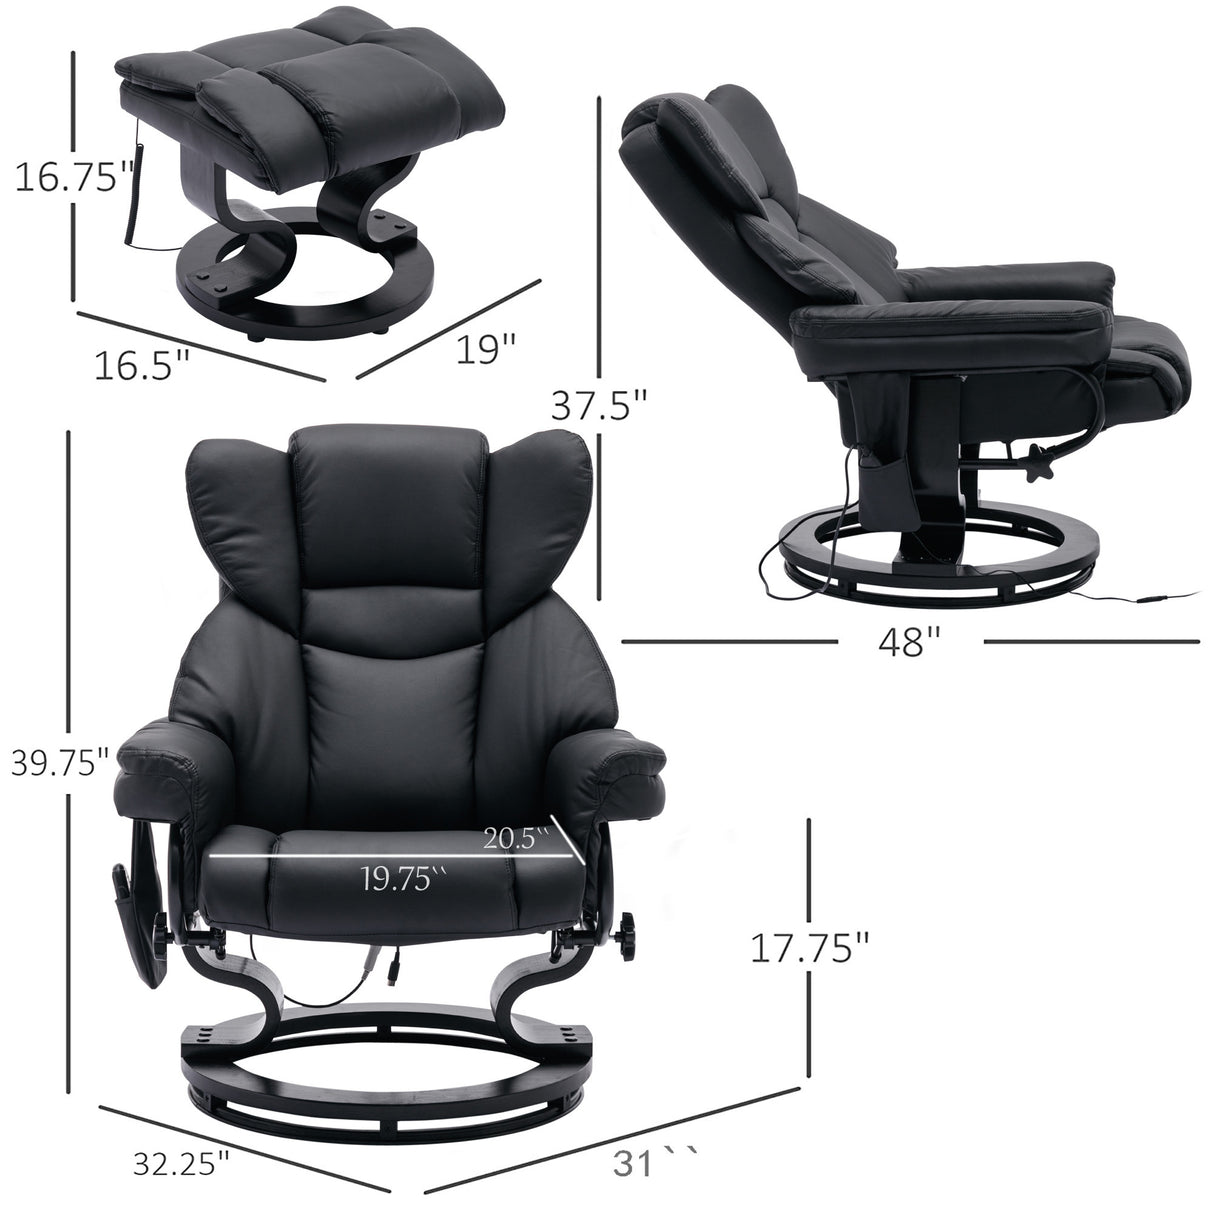 Massage Recliner and Ottoman, PU Leisure Office Chair with 10 Vibration Points, Adjustable Backrest, Side Pocket and Remote Control, for Living Room, Study, Bedroom, Black Home Elegance USA